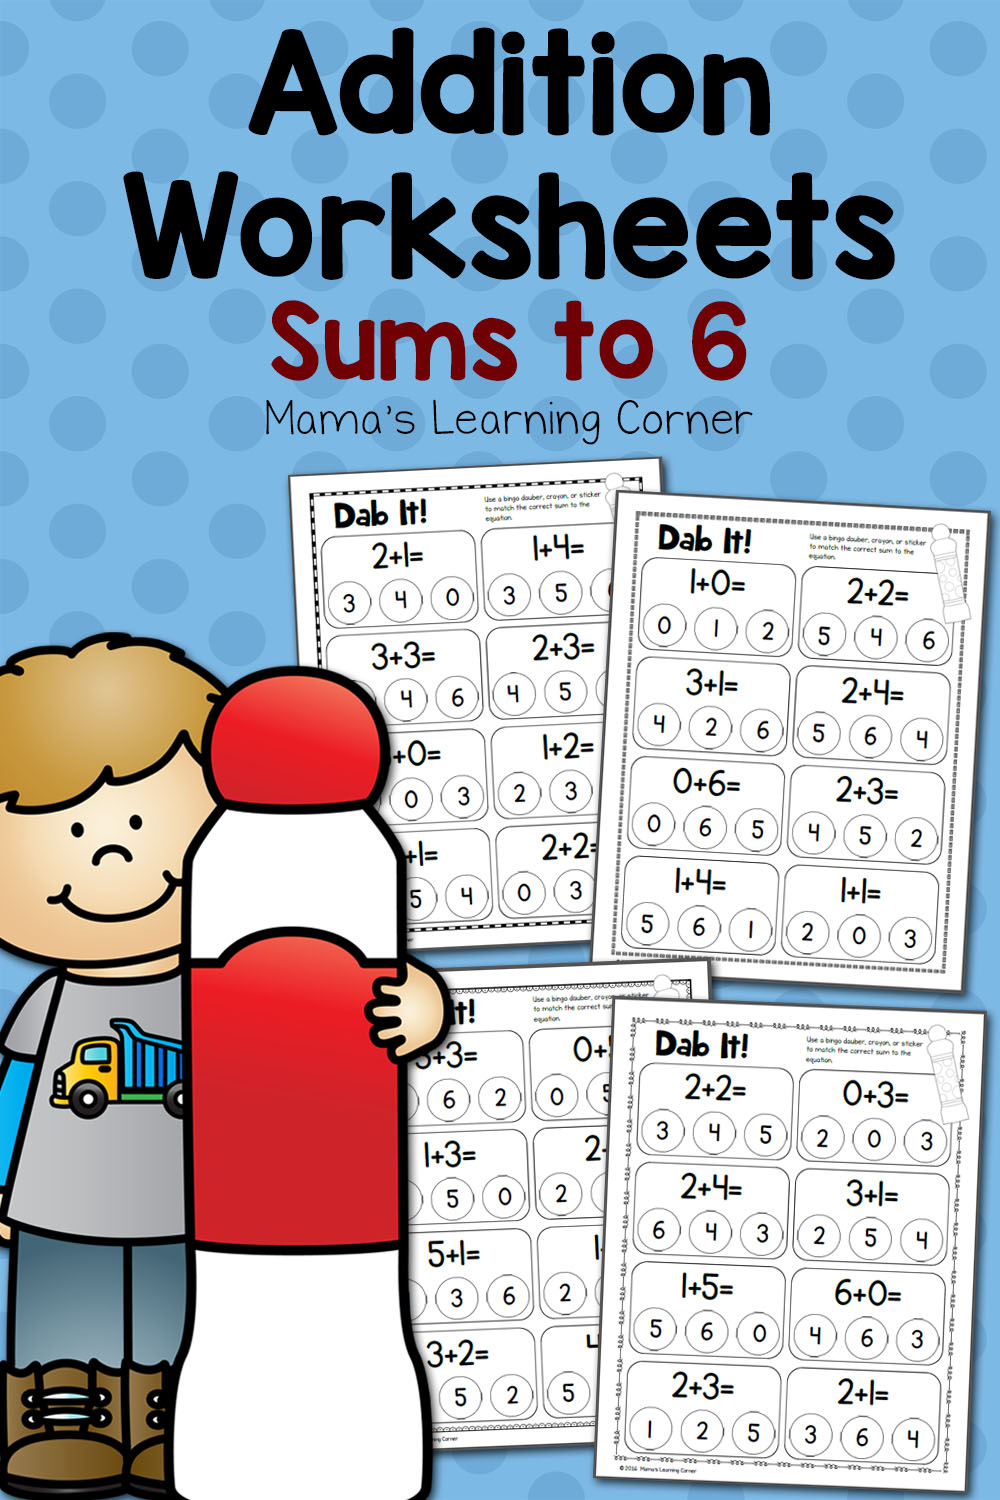 Dab It! Addition Worksheets - Sums to 6 - Mamas Learning Corner